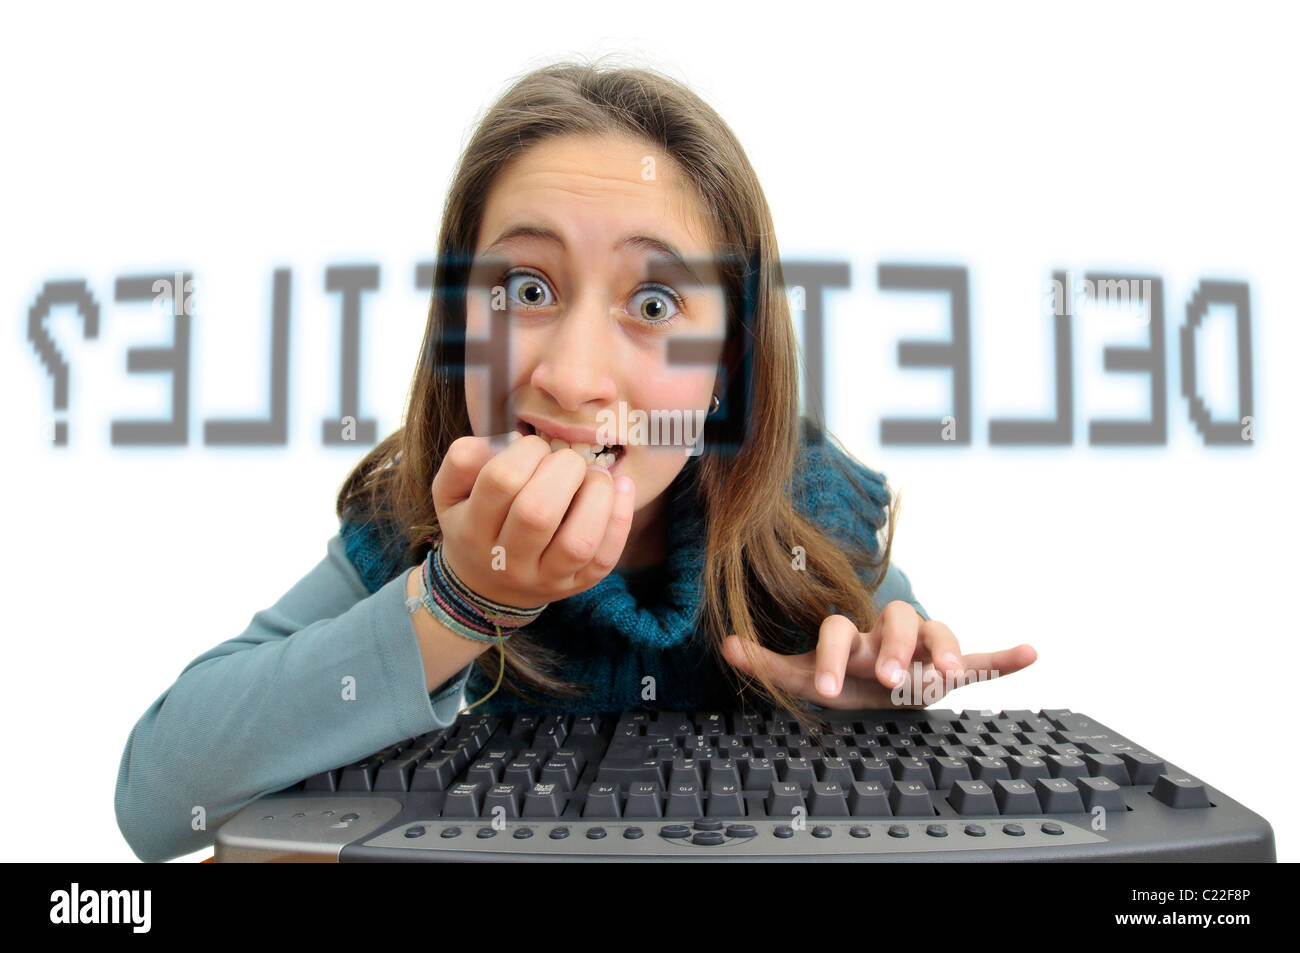 Stressed young girl in front of a computer screen with the question: Delete file? Stock Photo